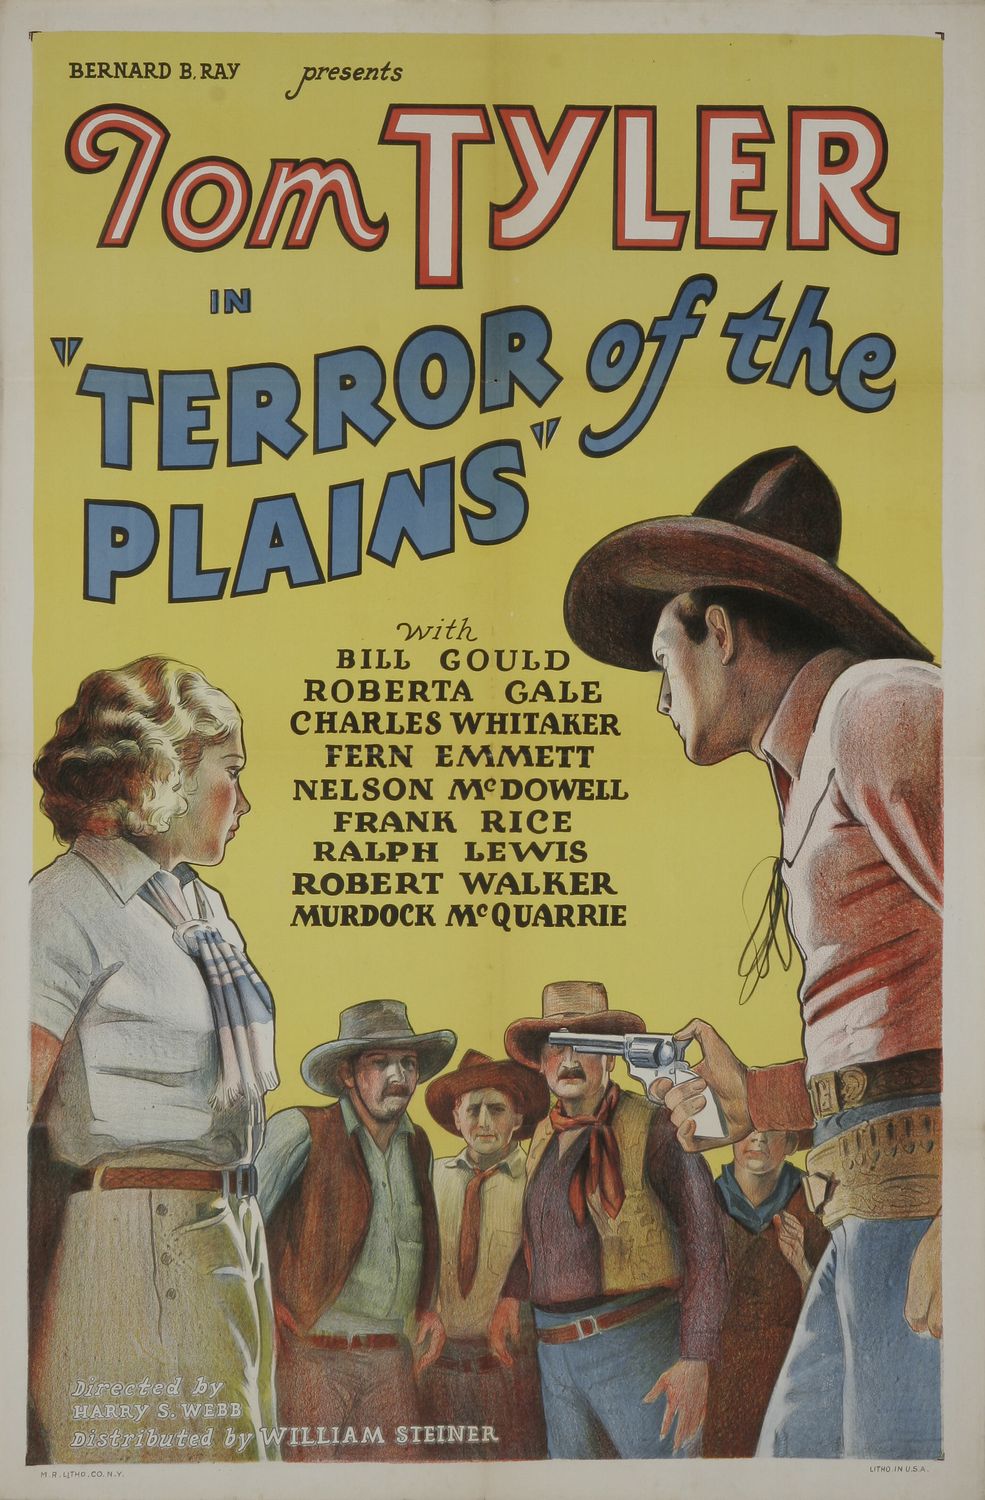 Extra Large Movie Poster Image for Terror of the Plains 